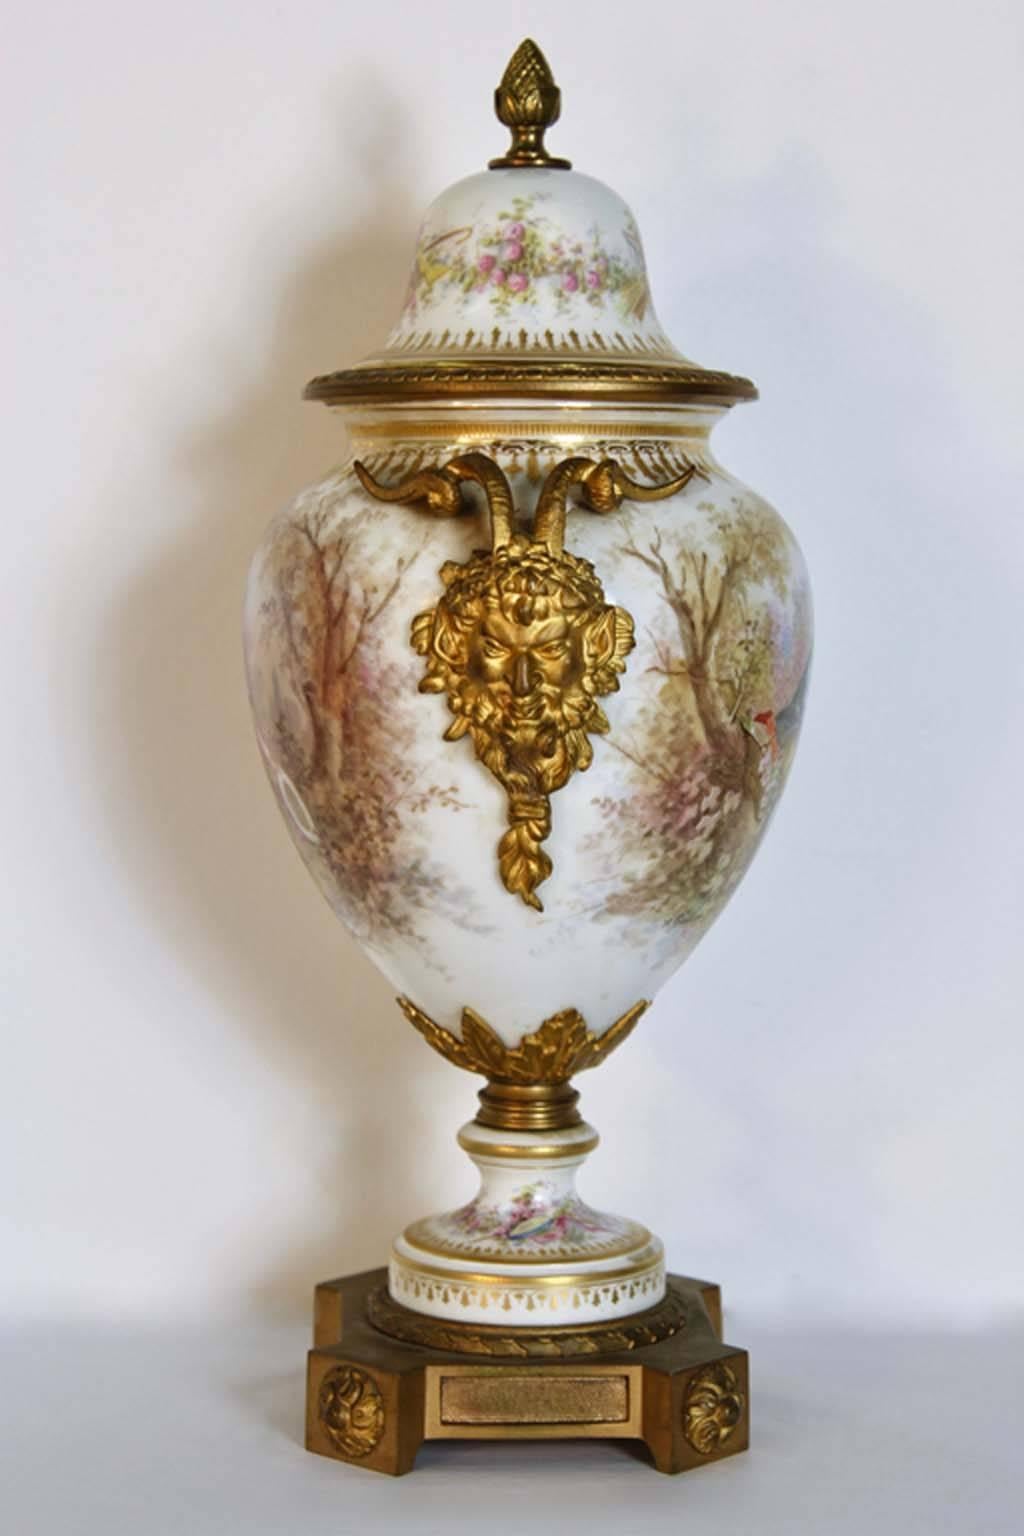 Antique Classical Sevres Urn with Gilt Bronze In Excellent Condition For Sale In Bridport, CT